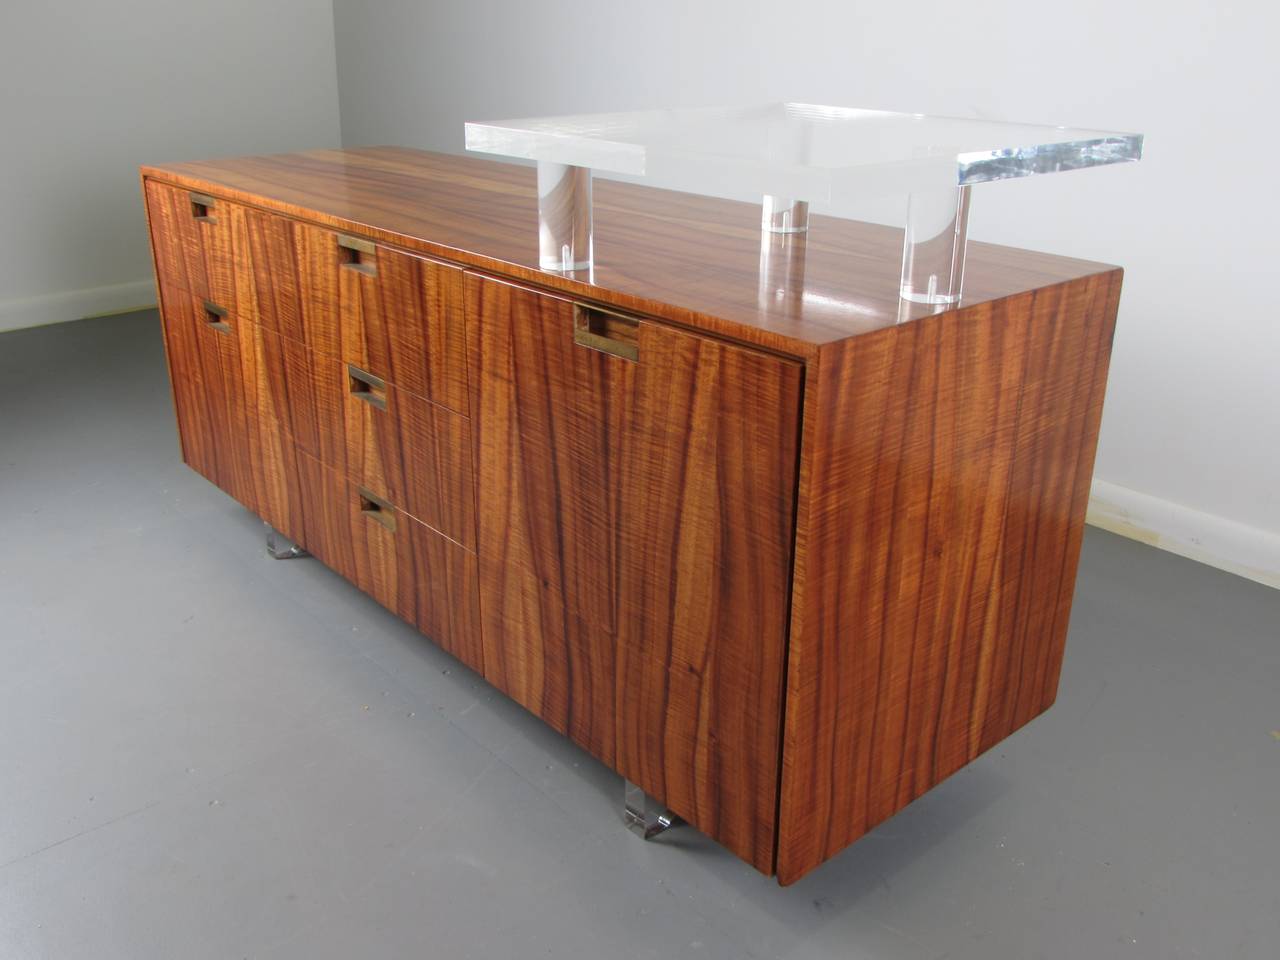 Rare office credenza in exotic veneer and Lucite by Vladimir Kagan, 1970s. Fully restored and in excellent condition. 

We offer free regular deliveries to NYC and Philadelphia area. Delivery to DC, MD, CT and MA are available if schedule permits,